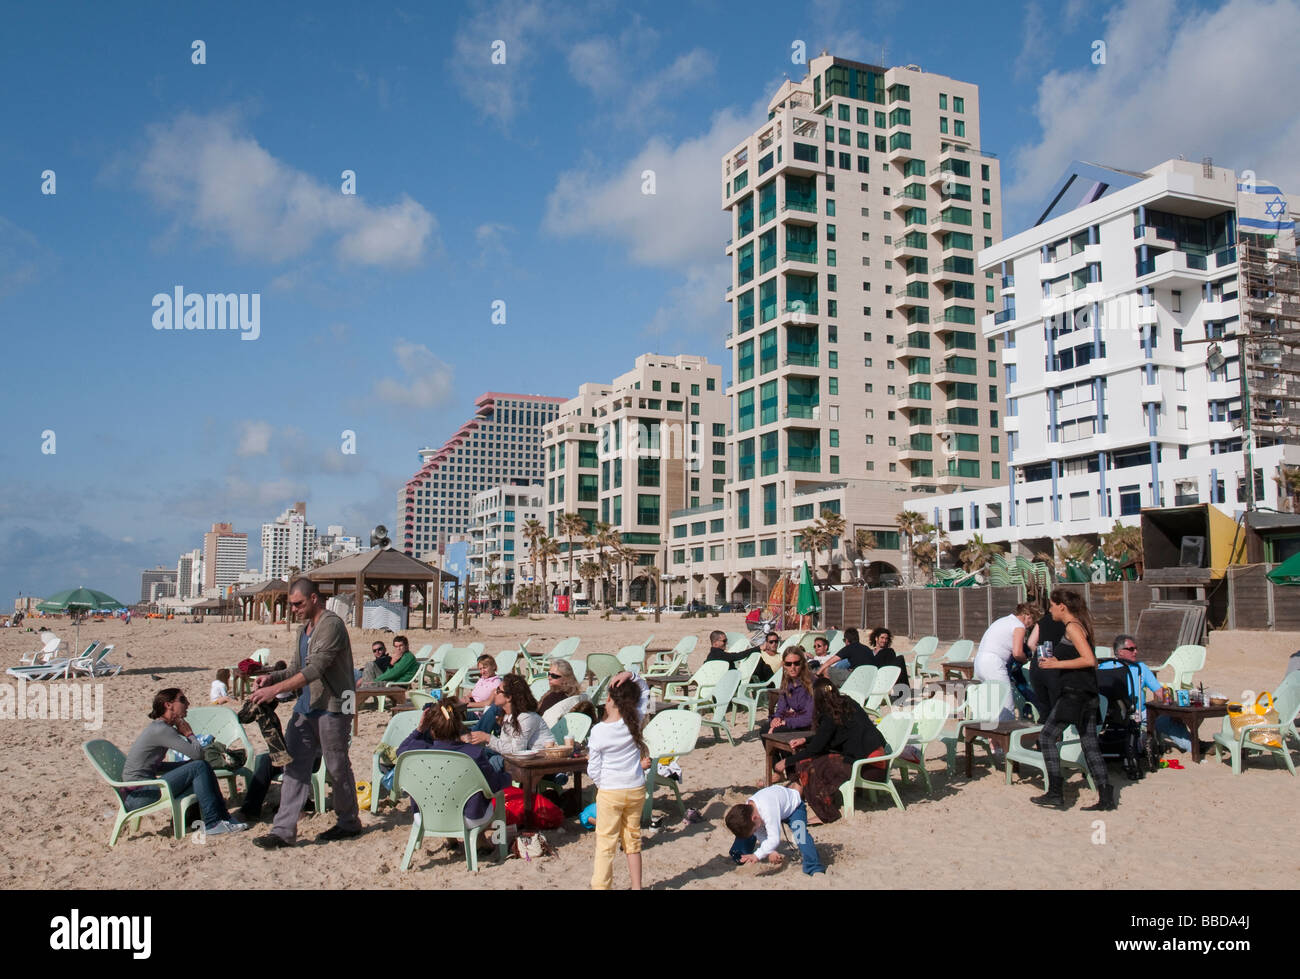 Israel Tel Aviv Jerusalem beach view of the beach with sea front buildiings in bkgd Stock Photo